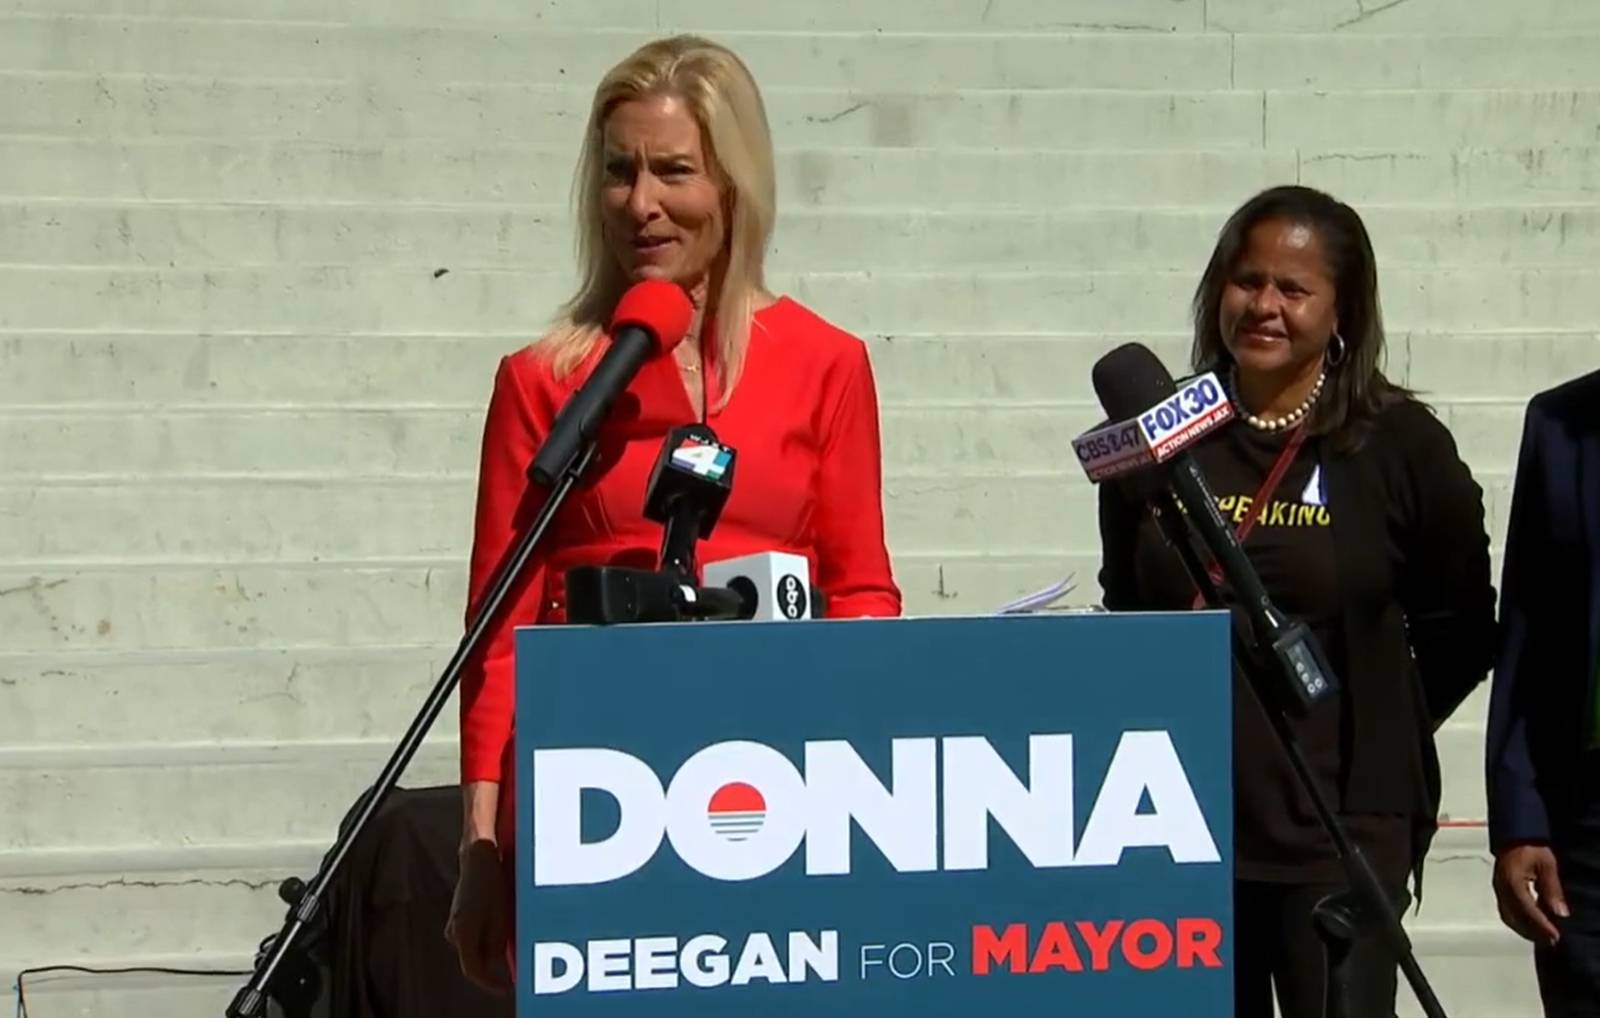 Deegan and Davis lead in race for Jacksonville mayor according to new